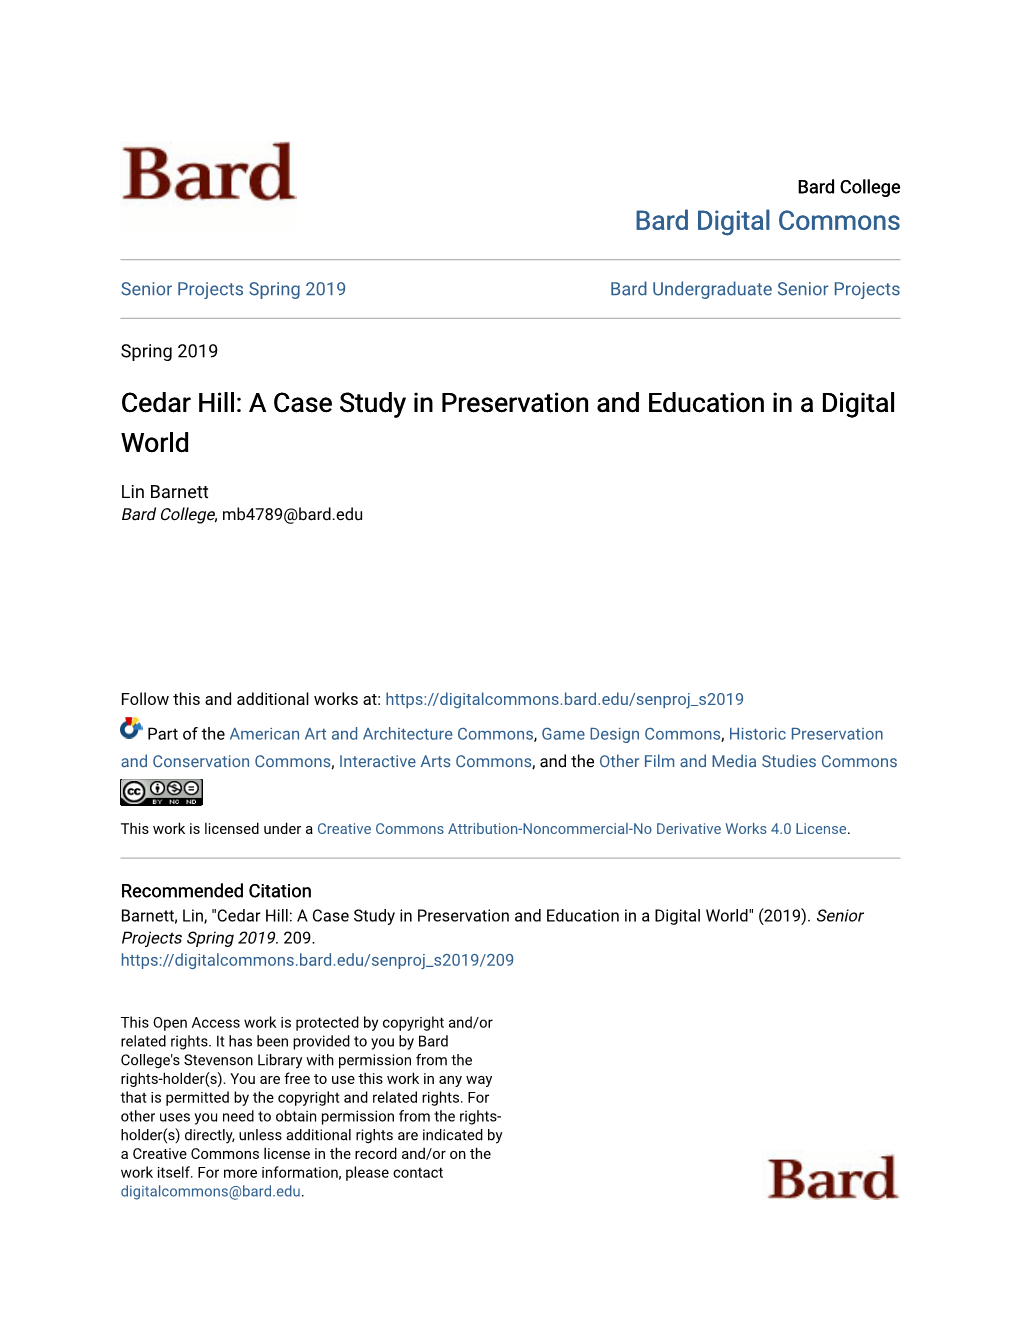 Cedar Hill: a Case Study in Preservation and Education in a Digital World